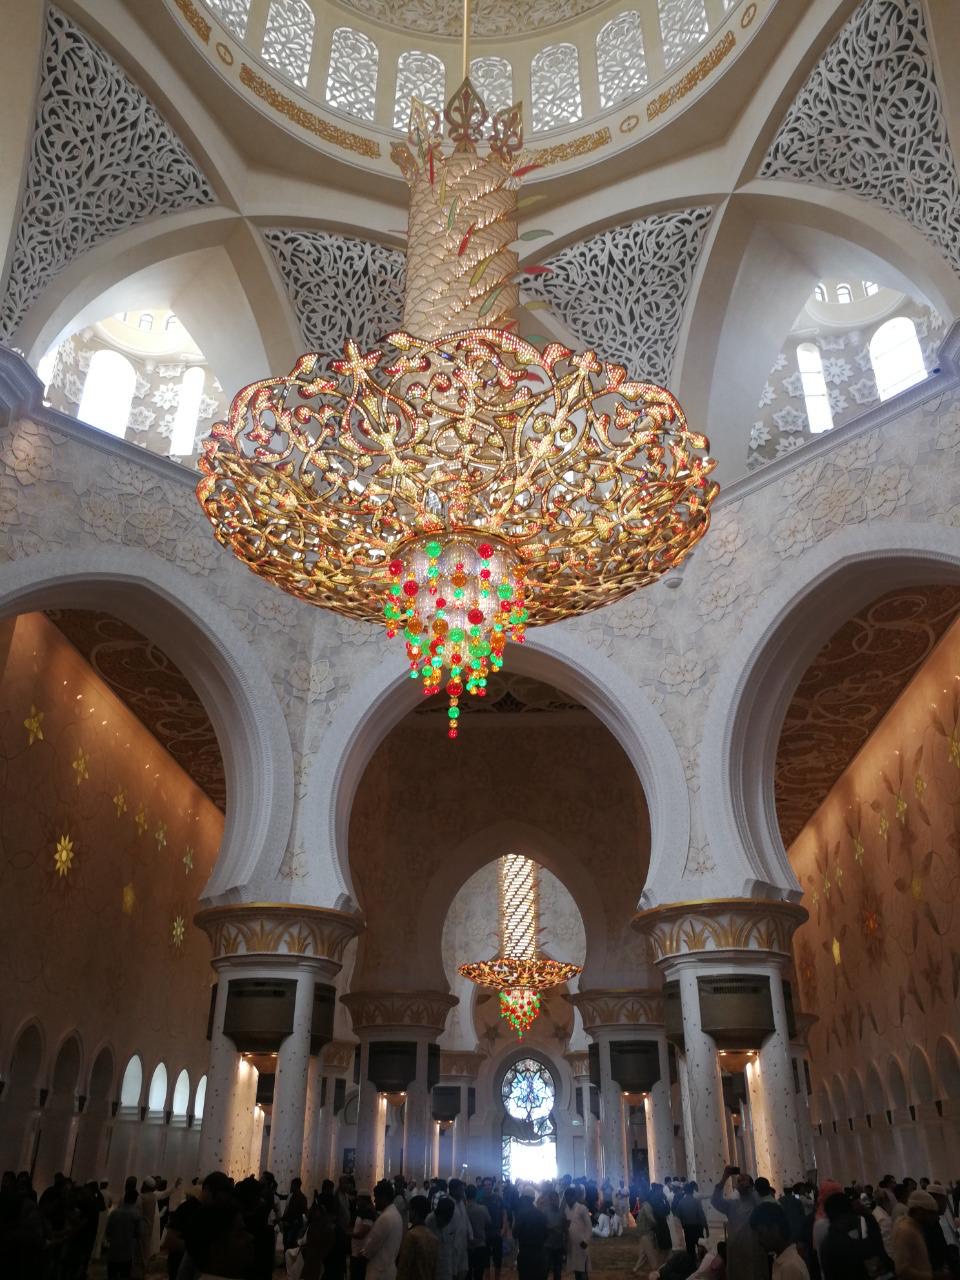 One of the seven unique chandeliers that adorn the Sheikh Zayed Grand Mosque